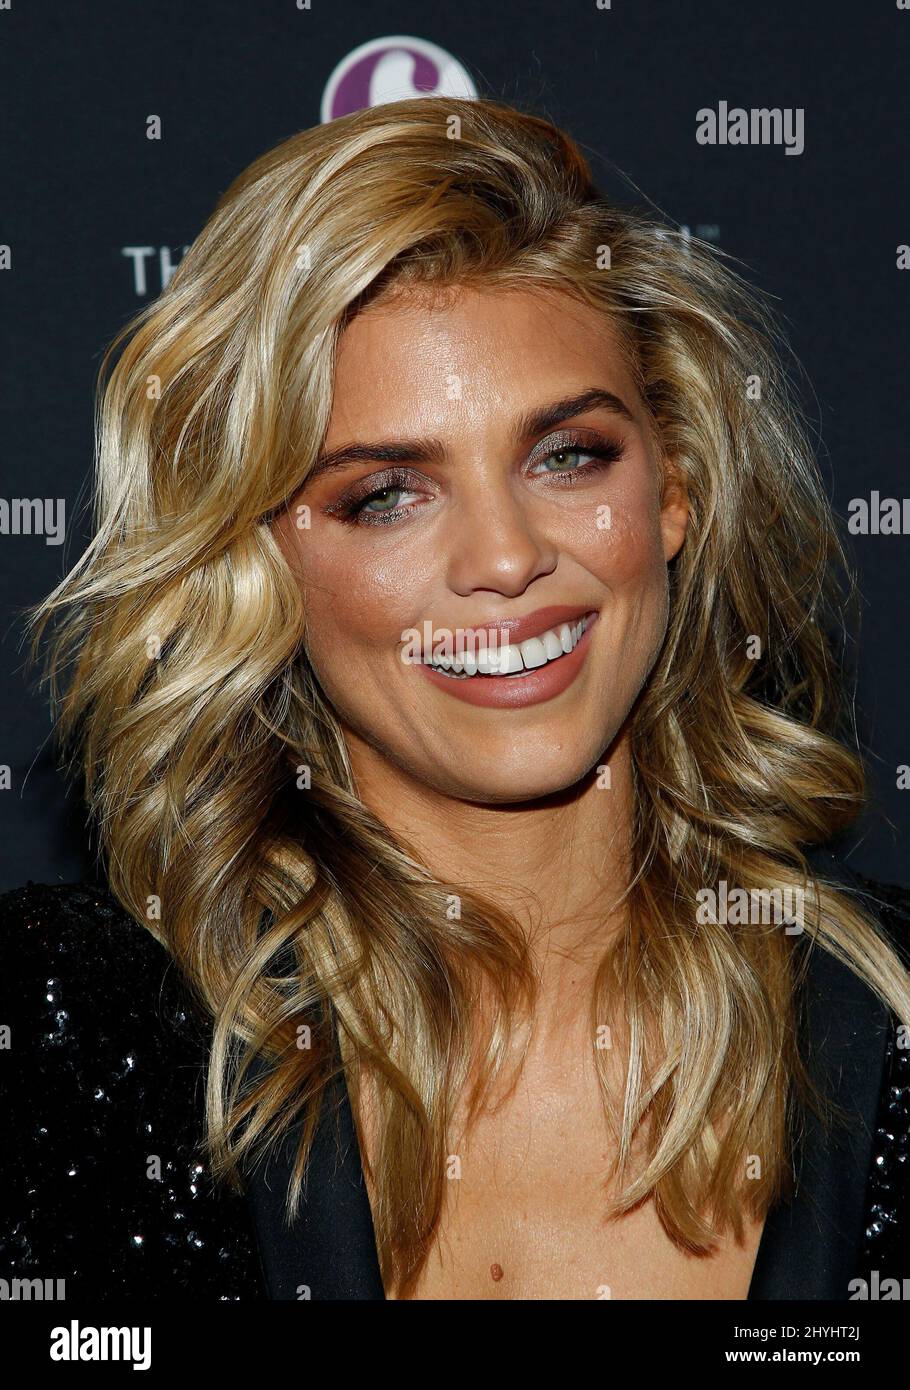 AnnaLynne McCord at BUSH Kick Off Grand Opening Weekend at The Barbershop Cuts & Cocktails in The Cosmopolitan on March 15, 2019 in Las Vegas, NV. Stock Photo